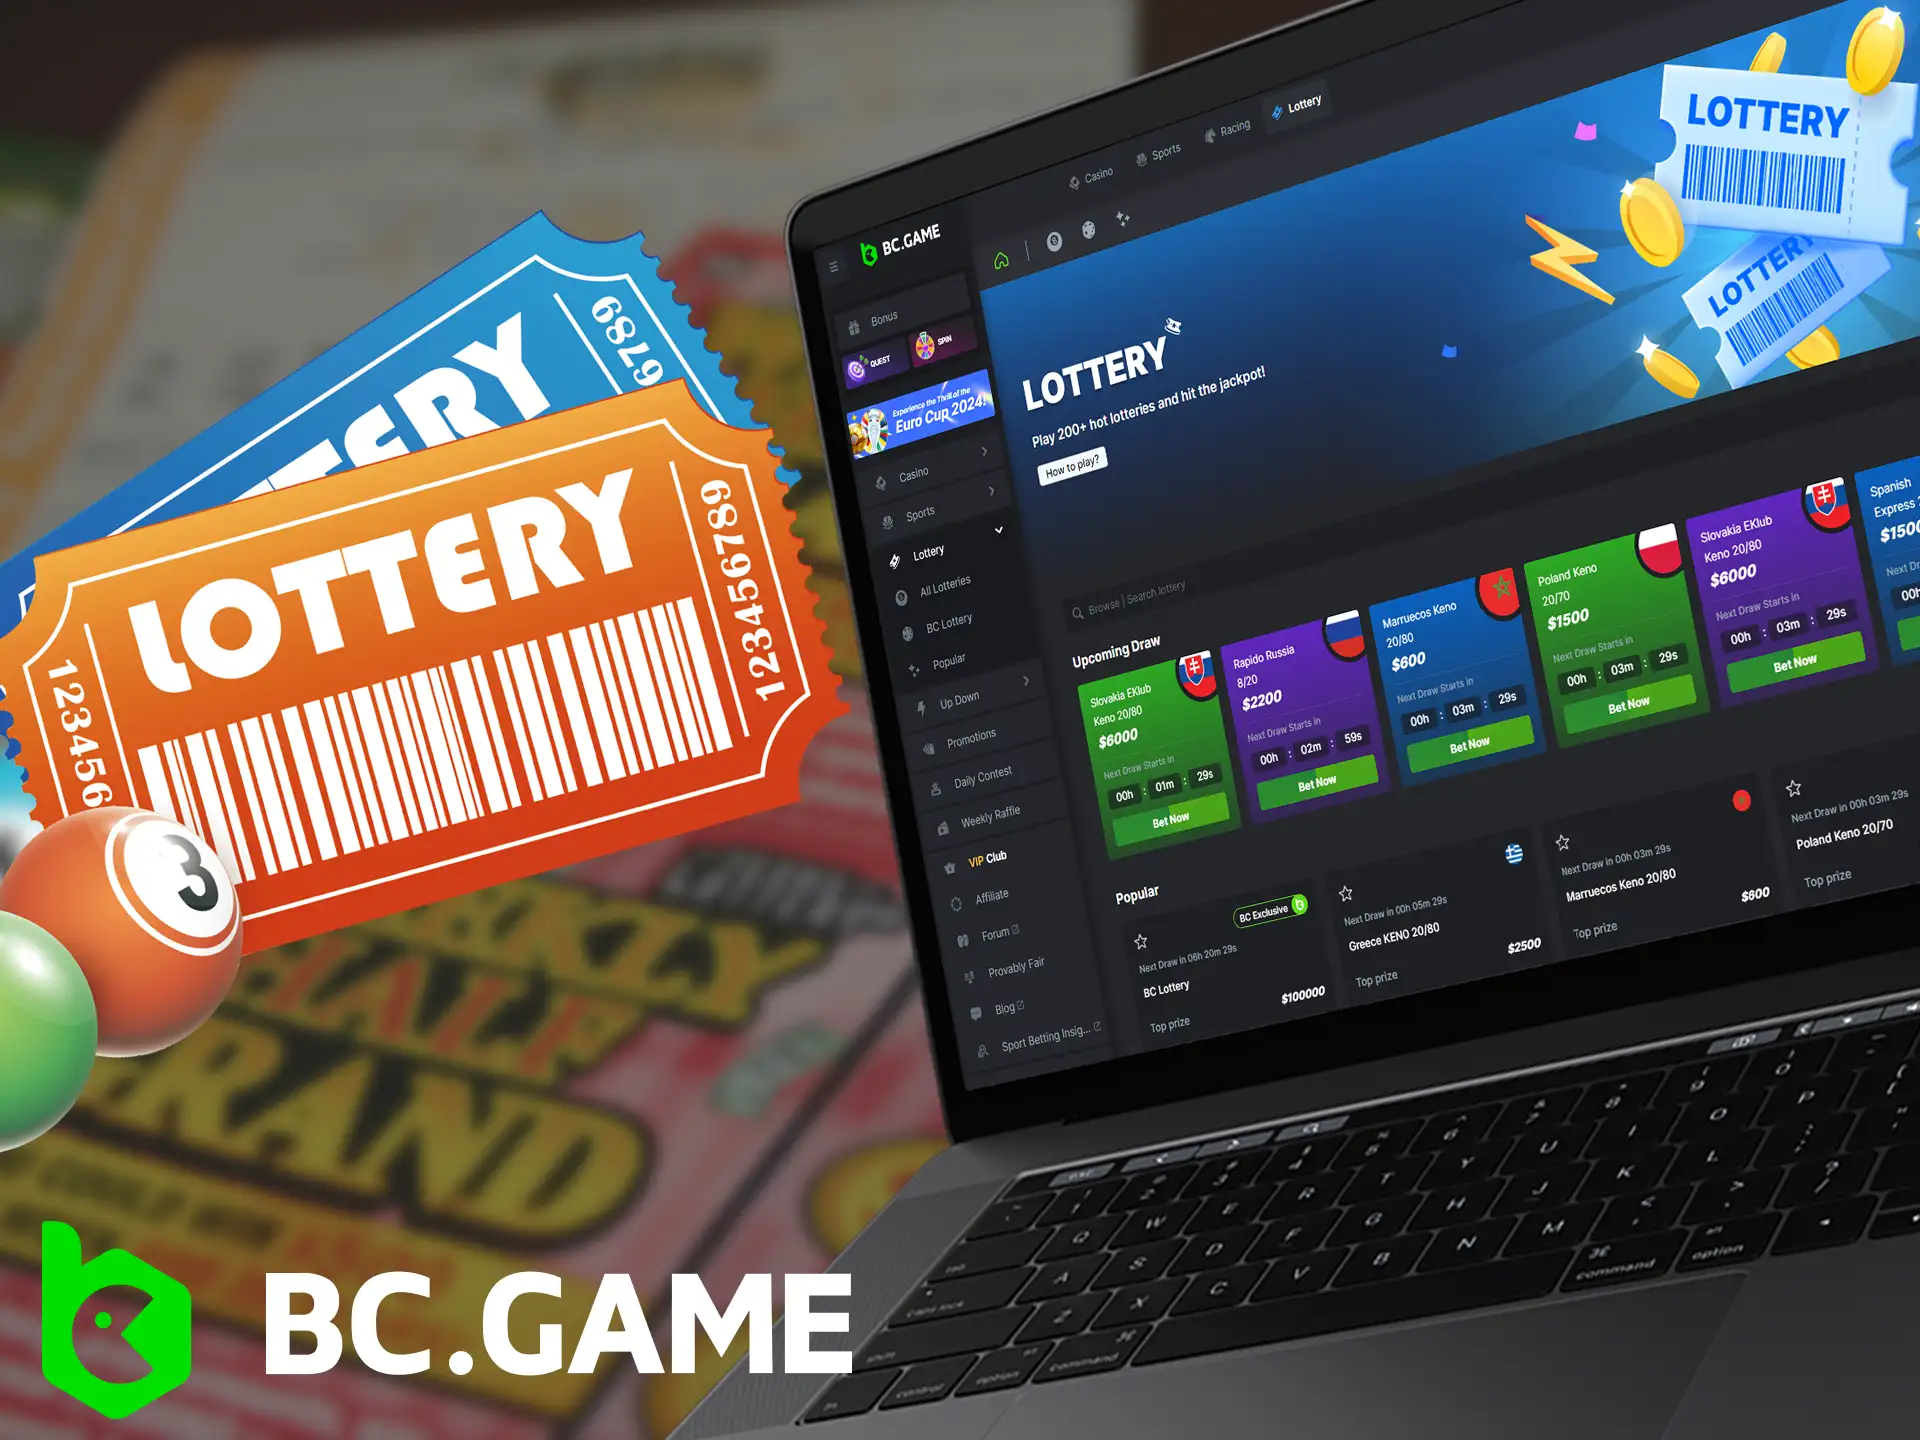 BC.Game offers a wide variety of draw-based games, from popular international choices to exciting BC exclusives.